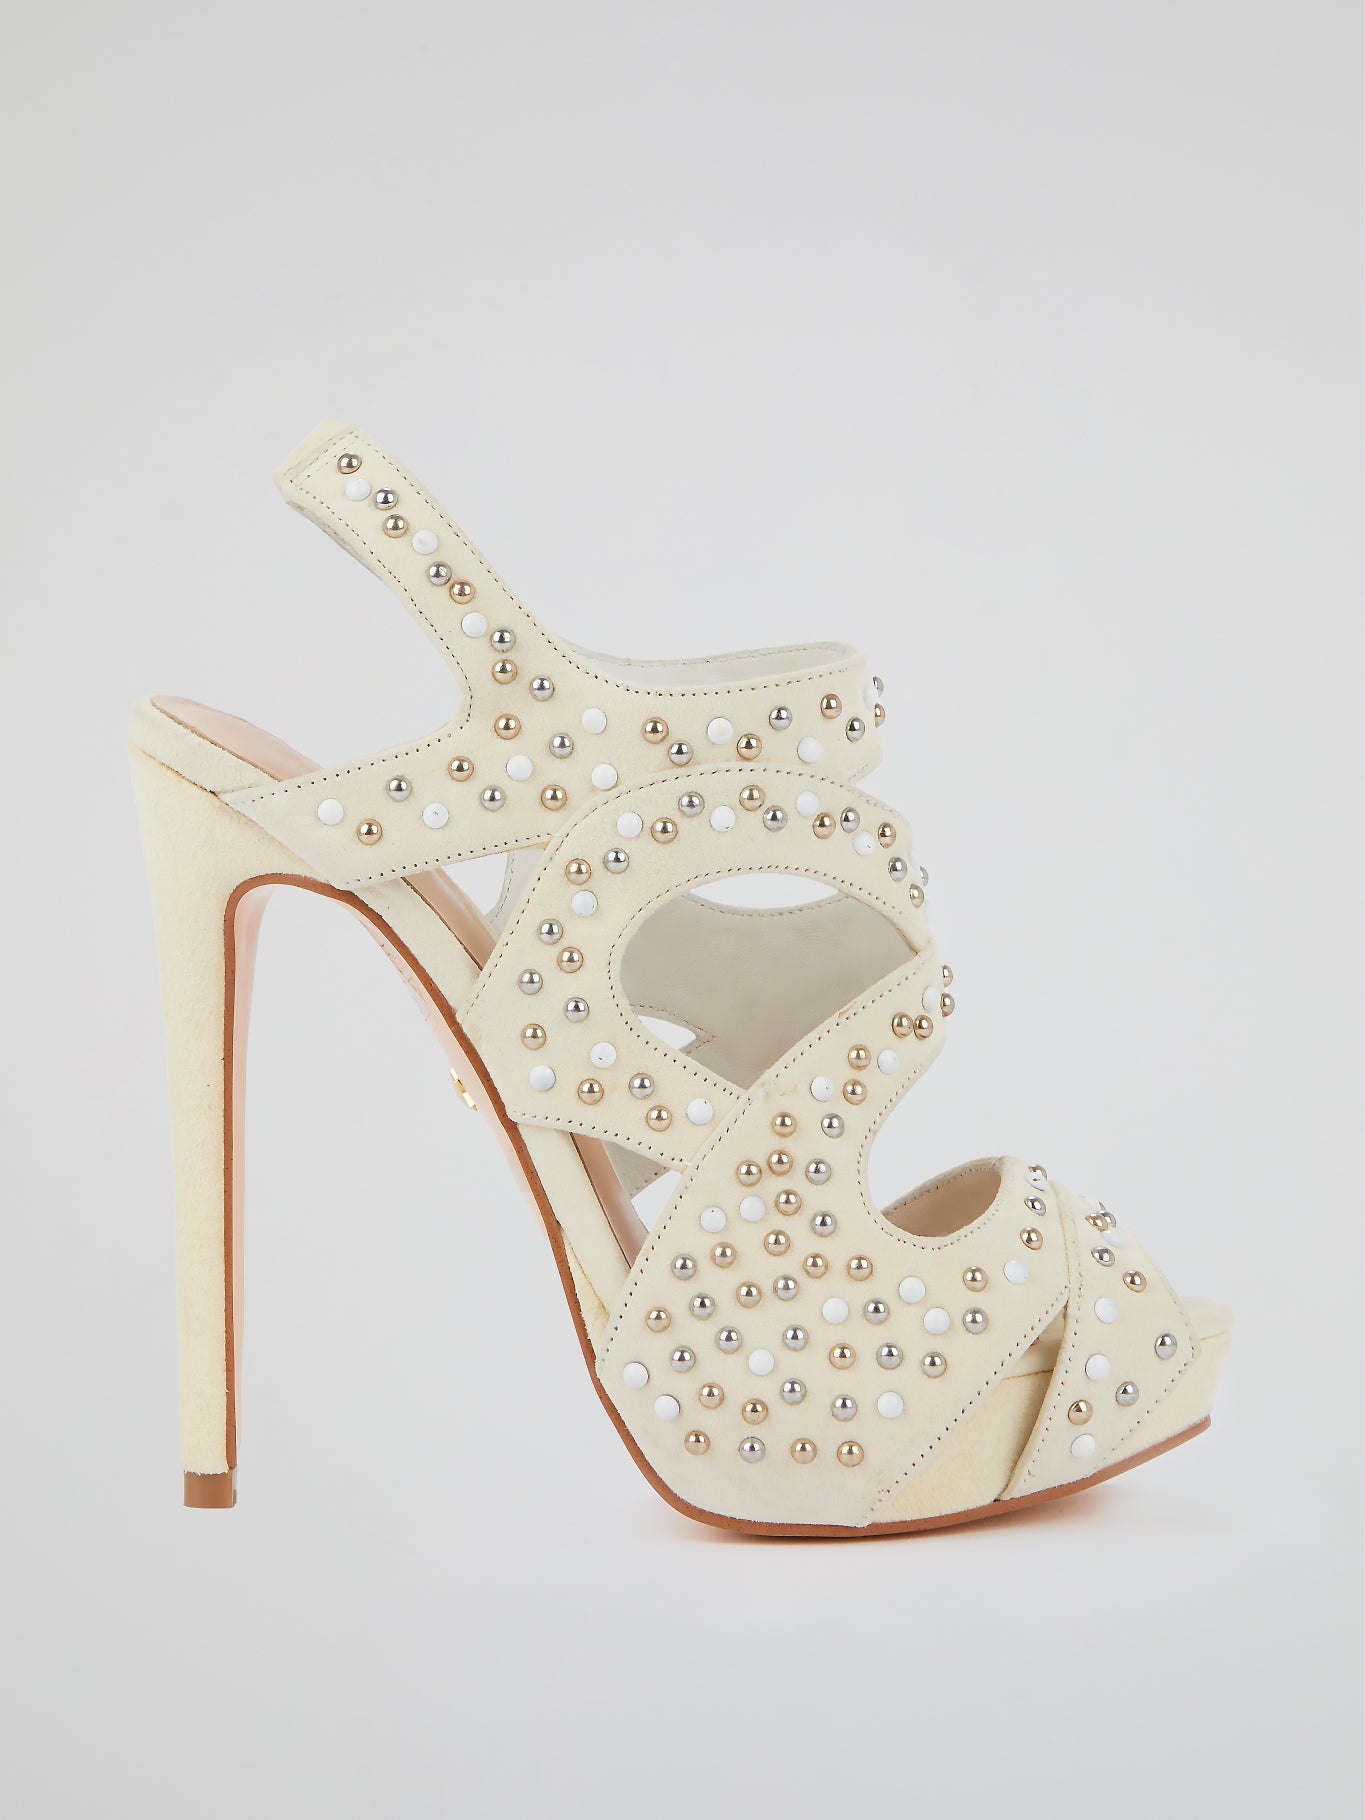 Studded Cage Pumps